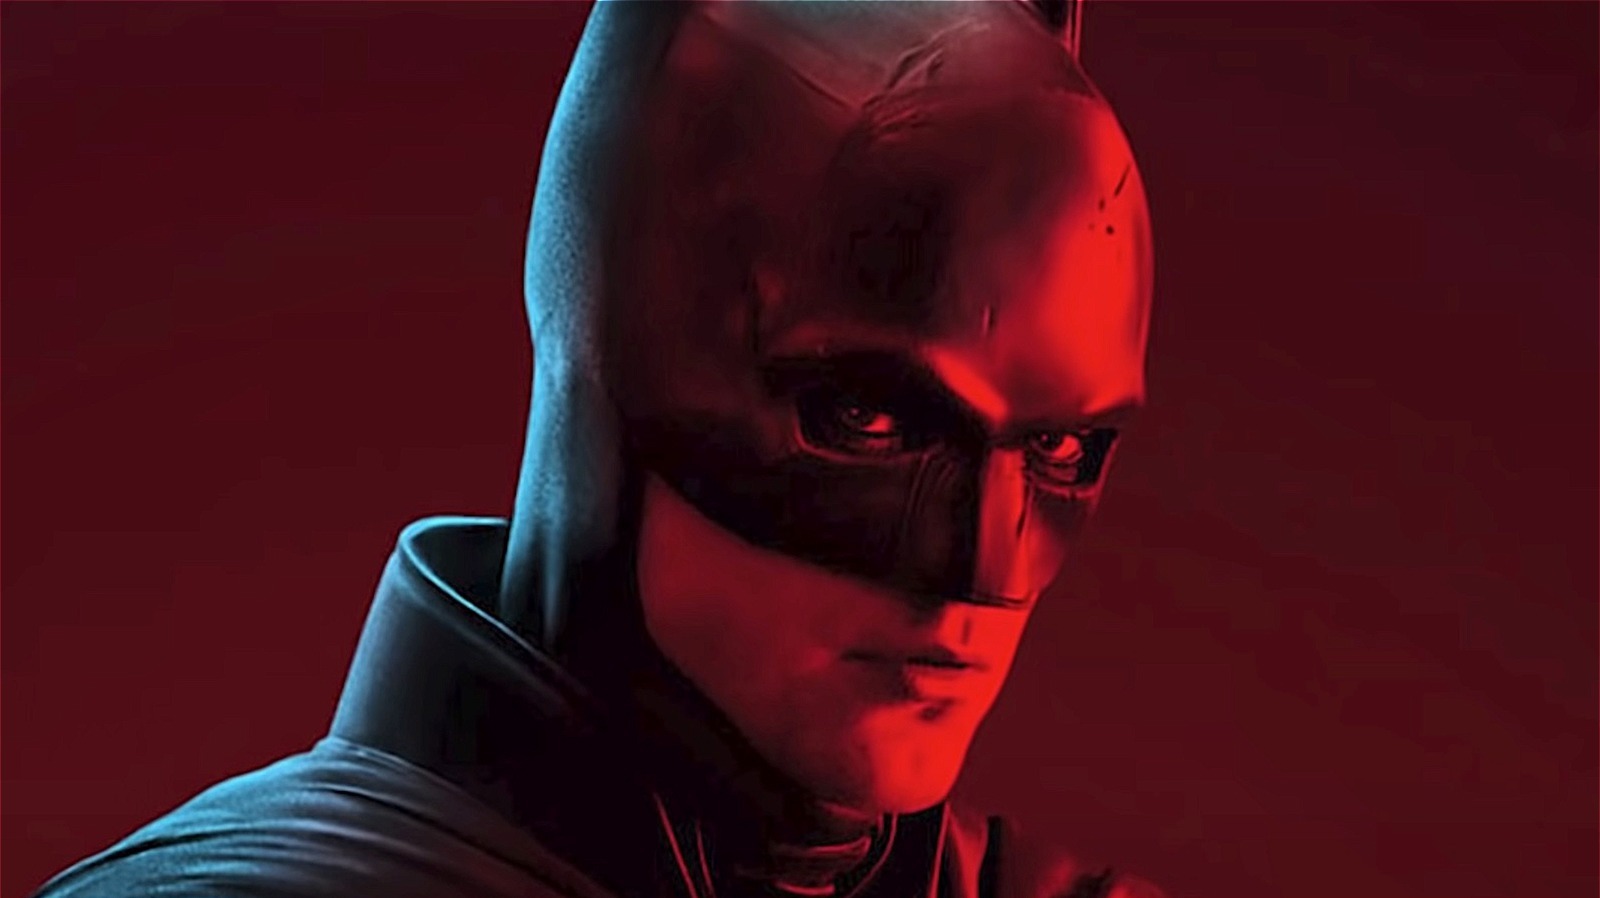 The Detail You Likely Never Noticed About Robert Pattinson's Batman Costume